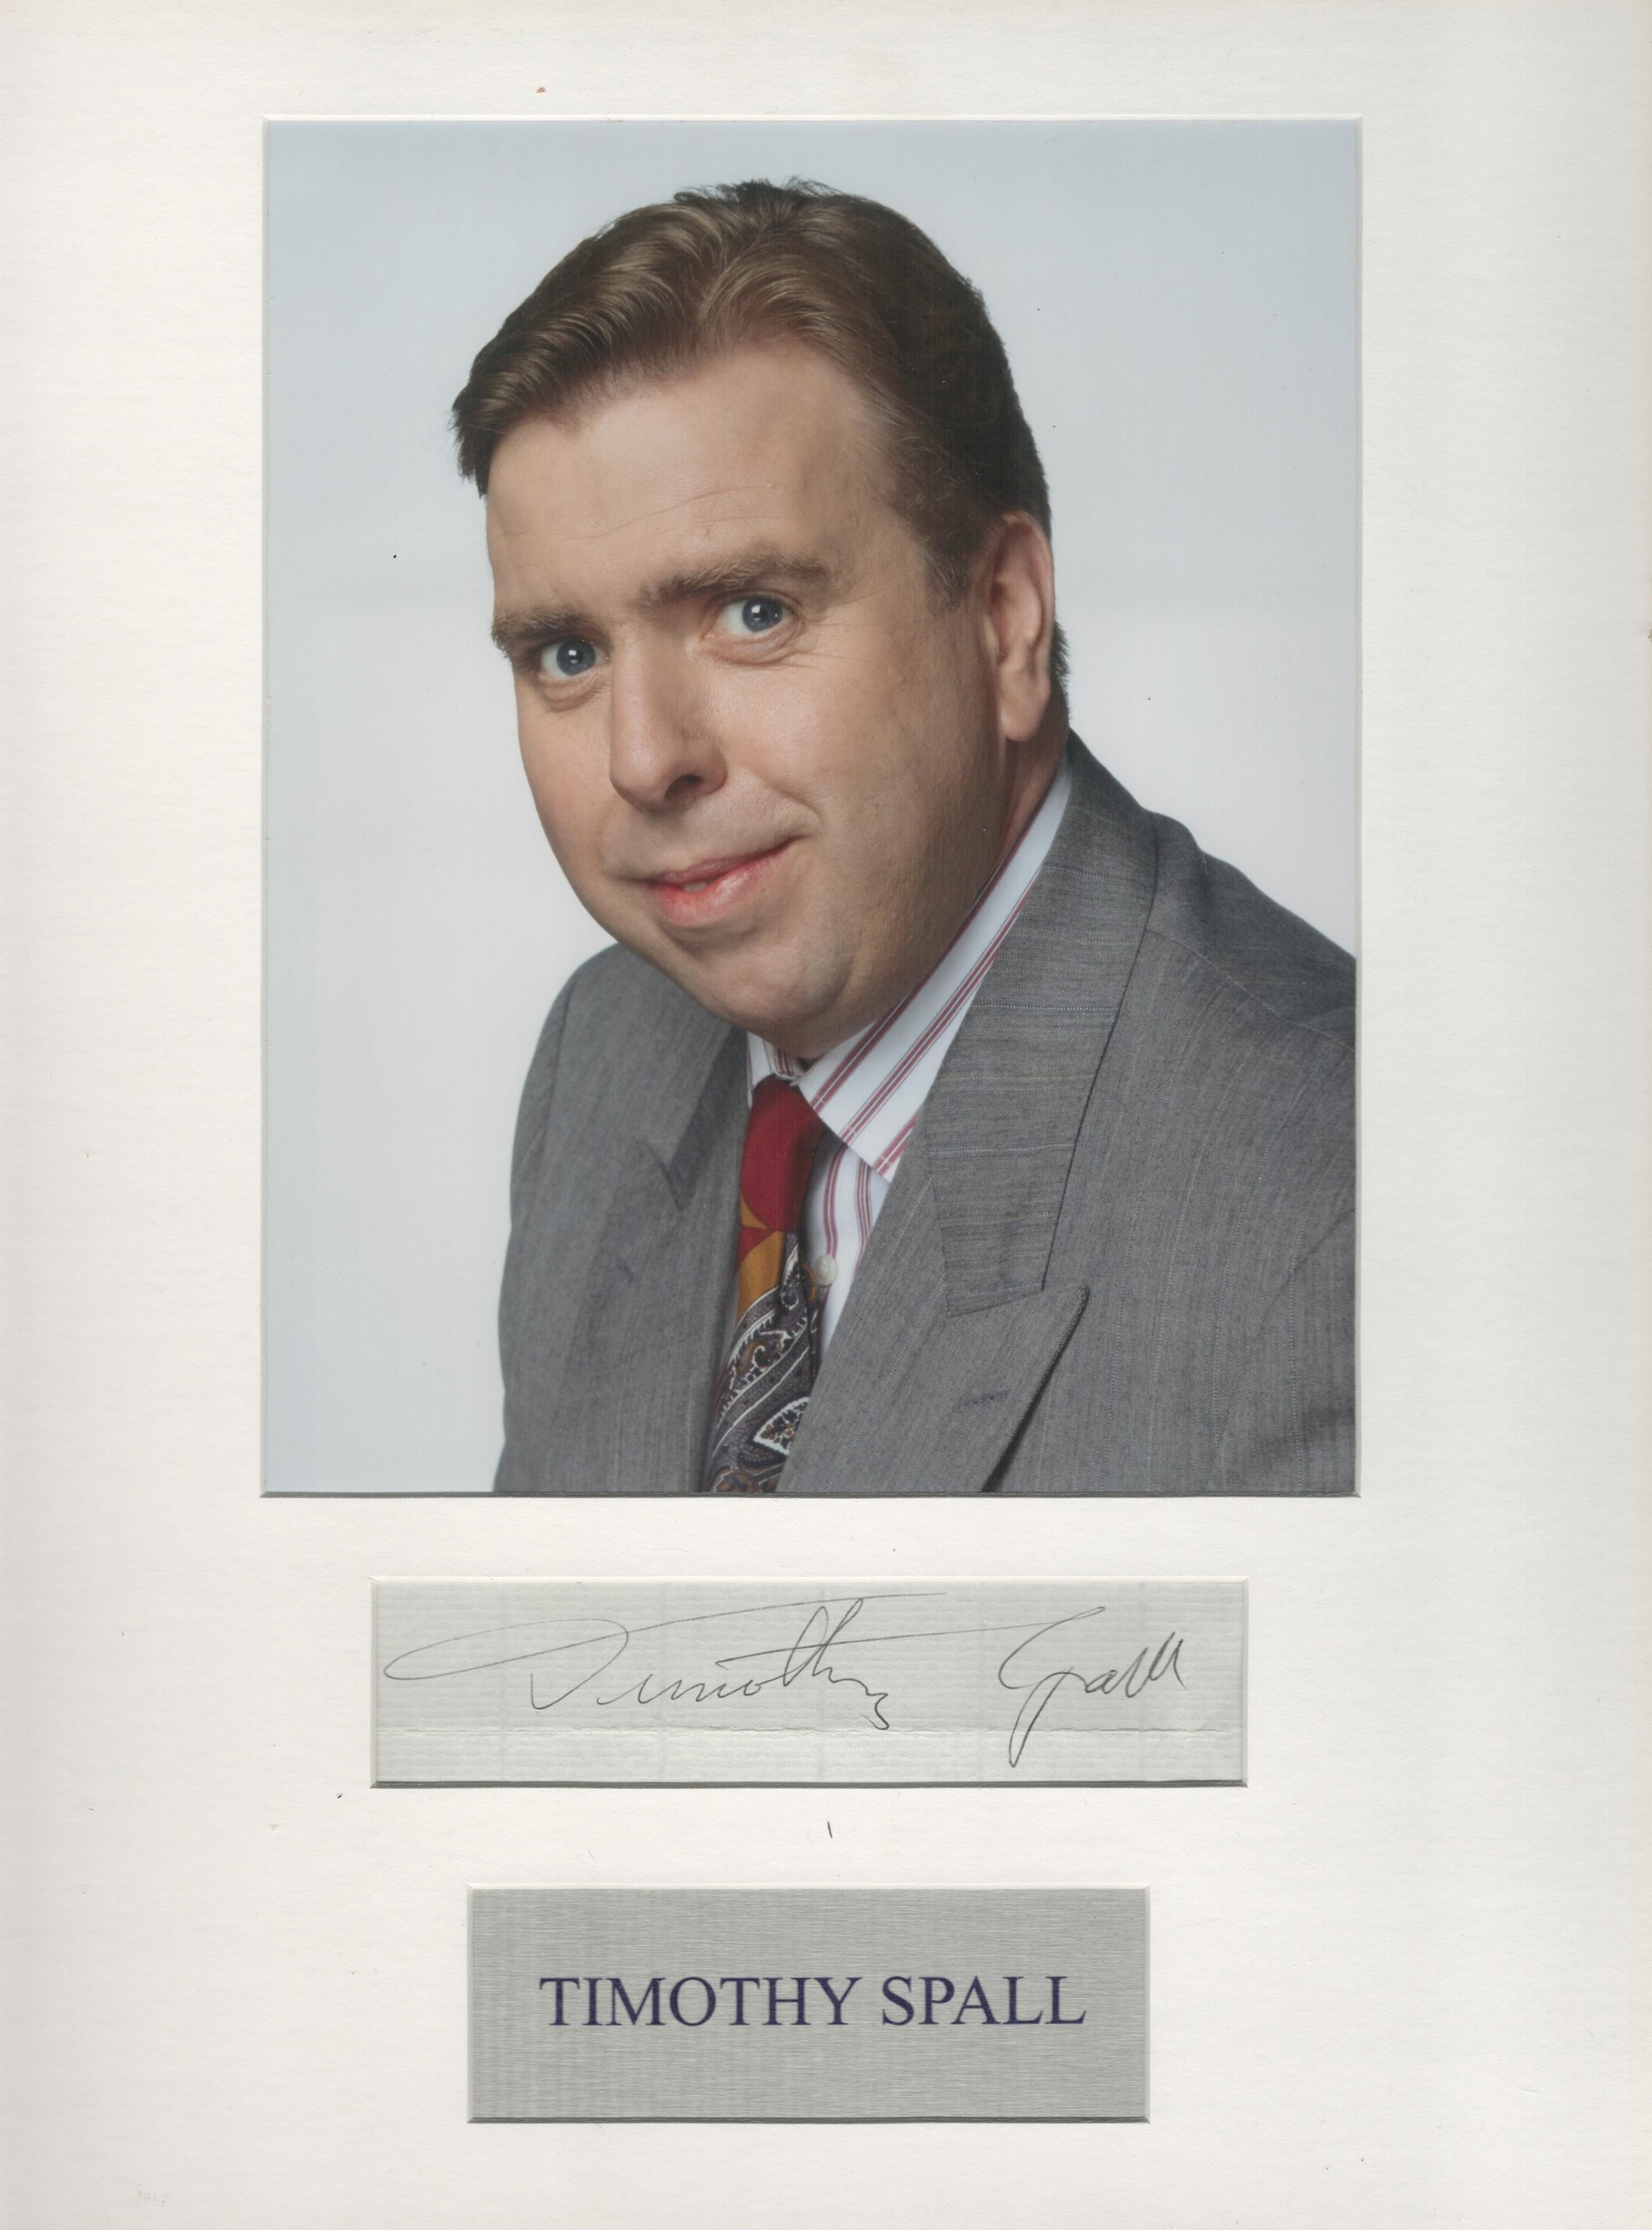 Timothy Spall 16x12 inch mounted signature piece includes signed page and colour photo. Good